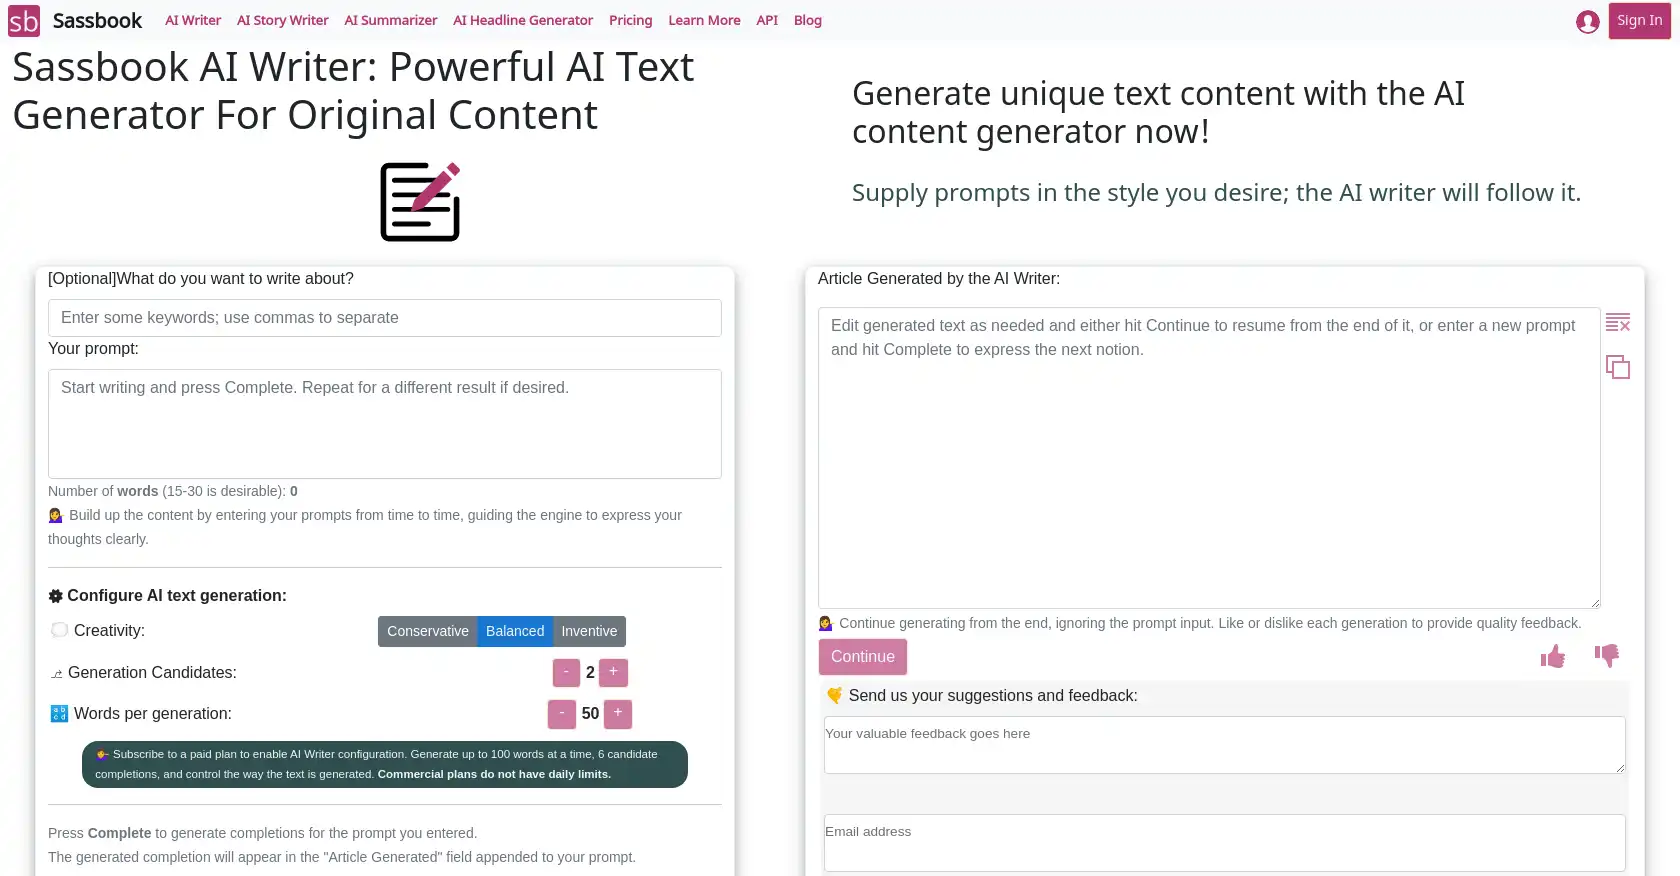 Sassbook AI Writer - AI tool for Content Creation, Writing assistance